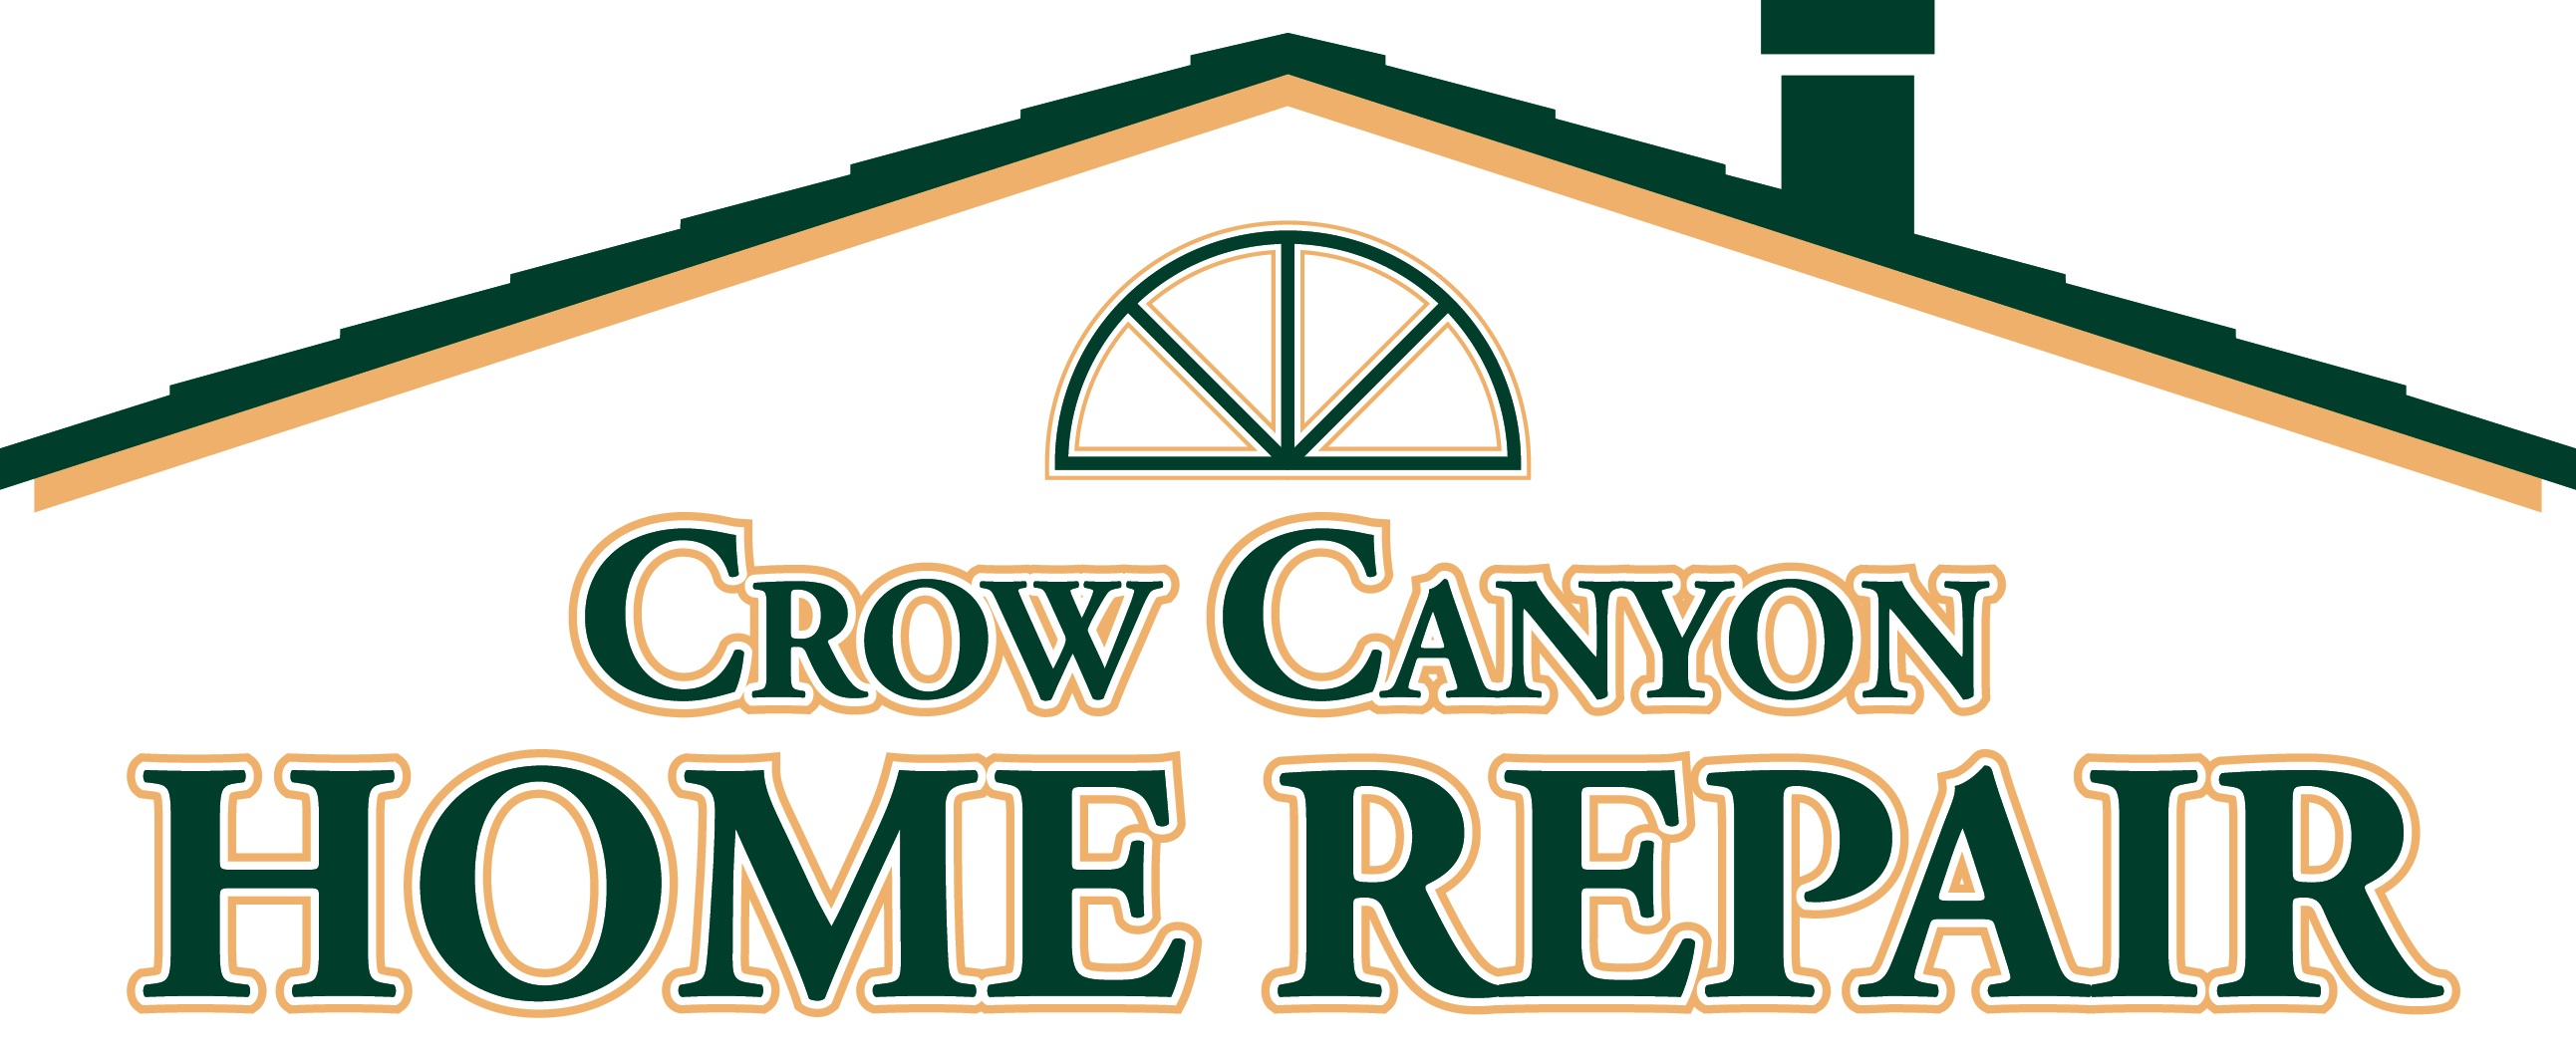 Crow Canyon Home Repair   Remodeling   Home